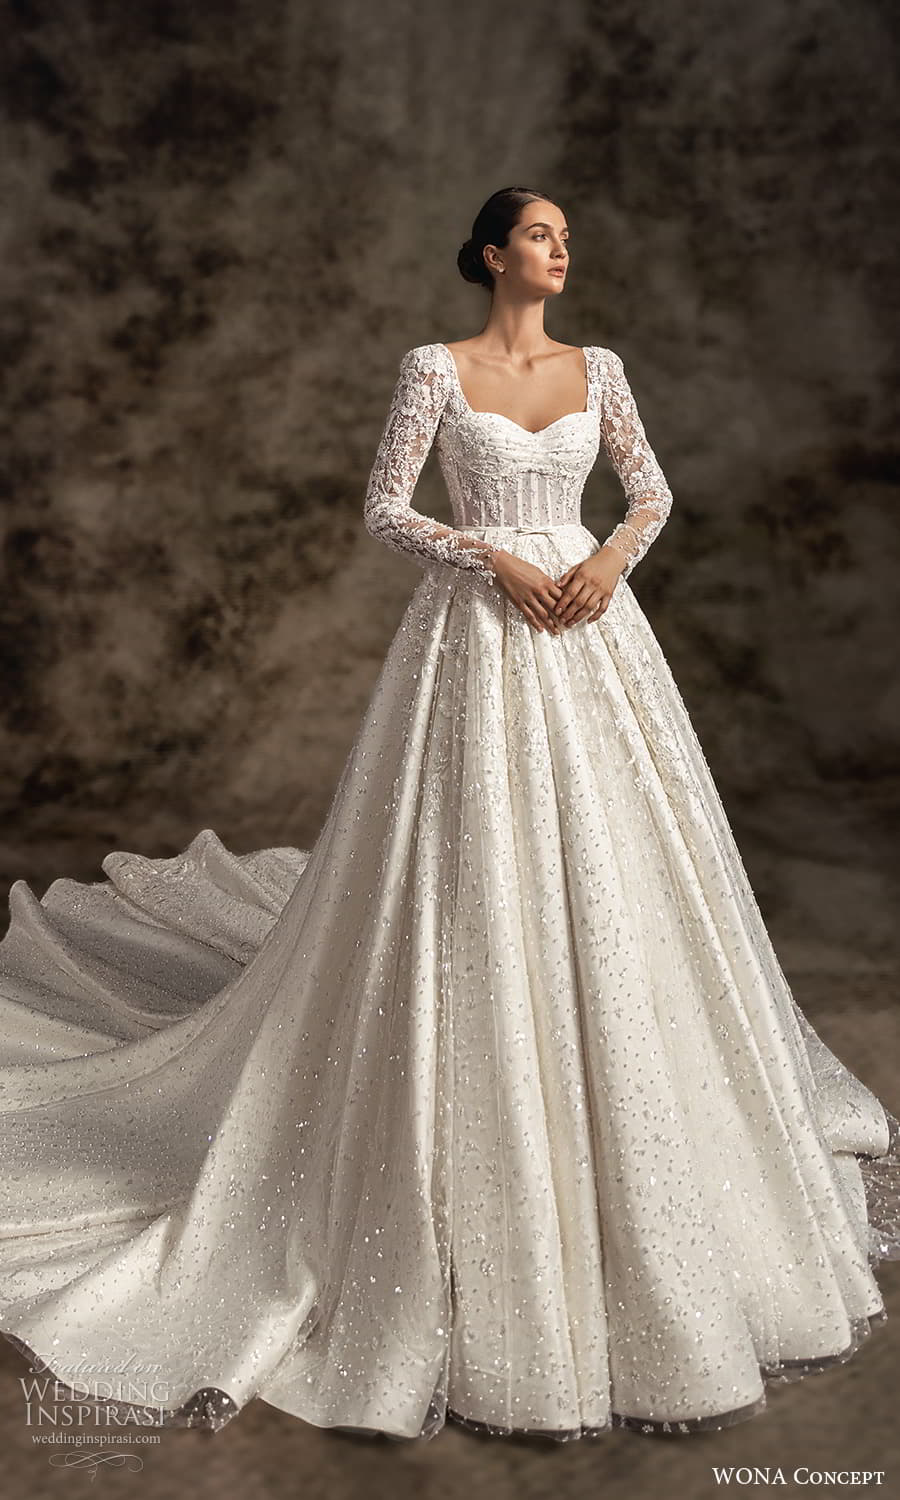 wona concept 2023 bridal long sleeve queen anne square sweetheart neckline fully embellished a line ball gown wedding dress chapel train (20) mv